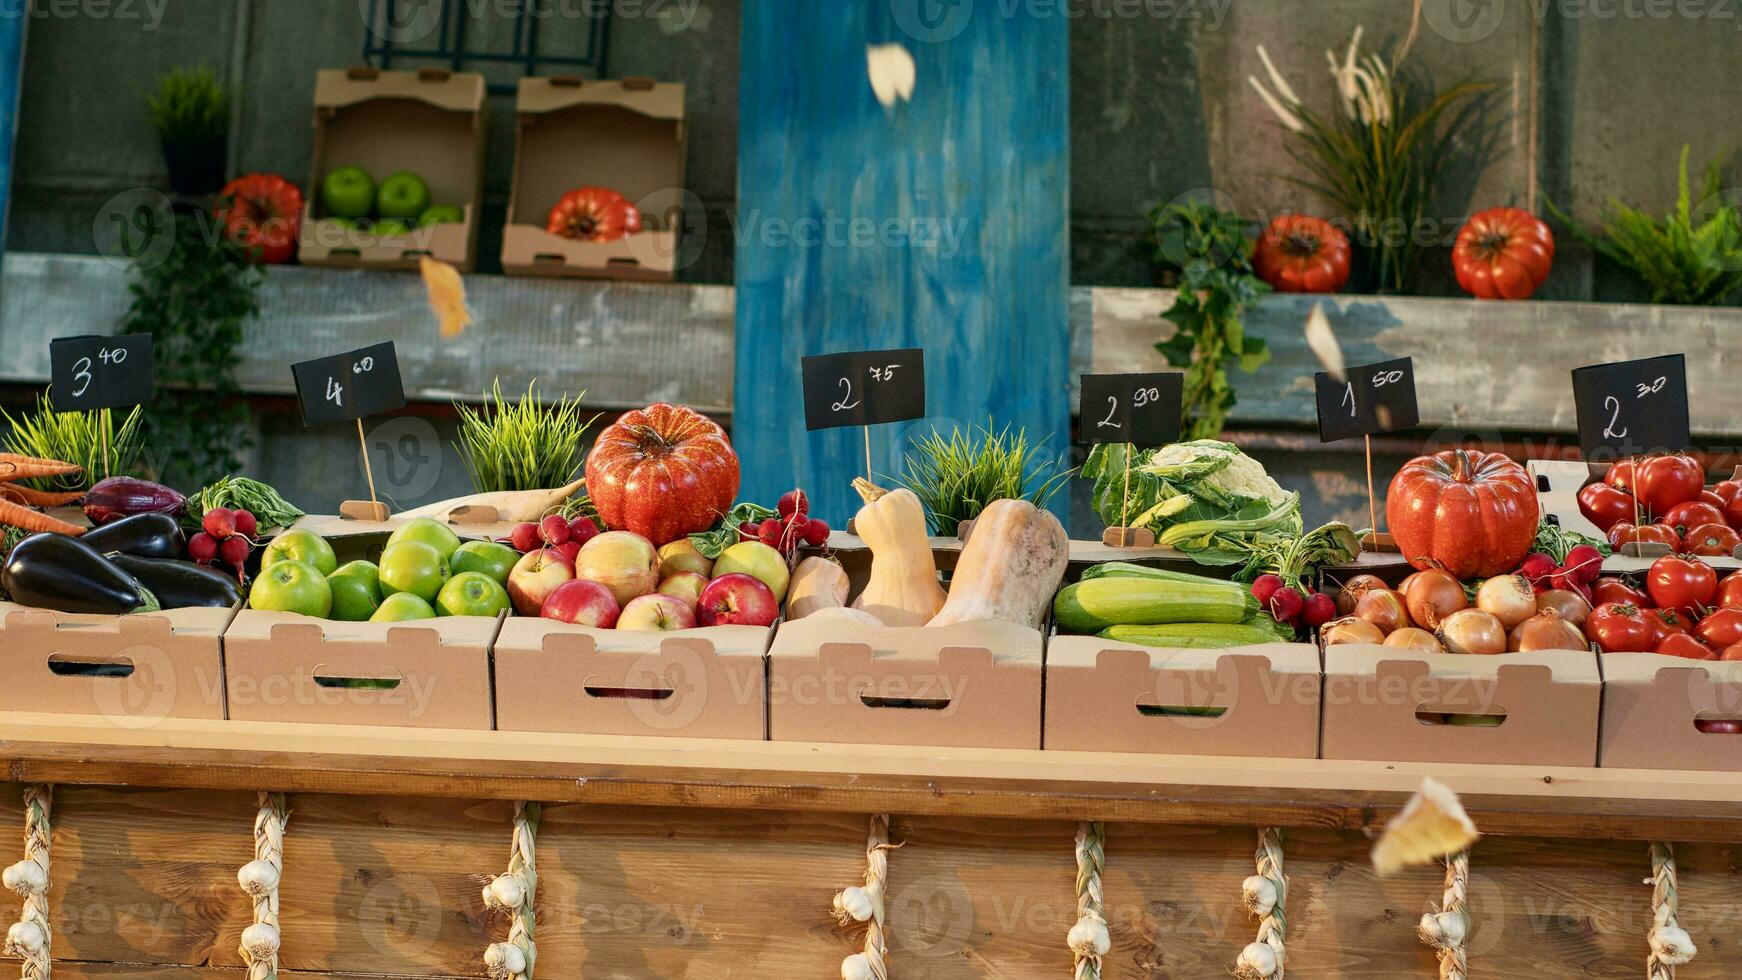 Food fair with farmers market stand to sell organic produce photo